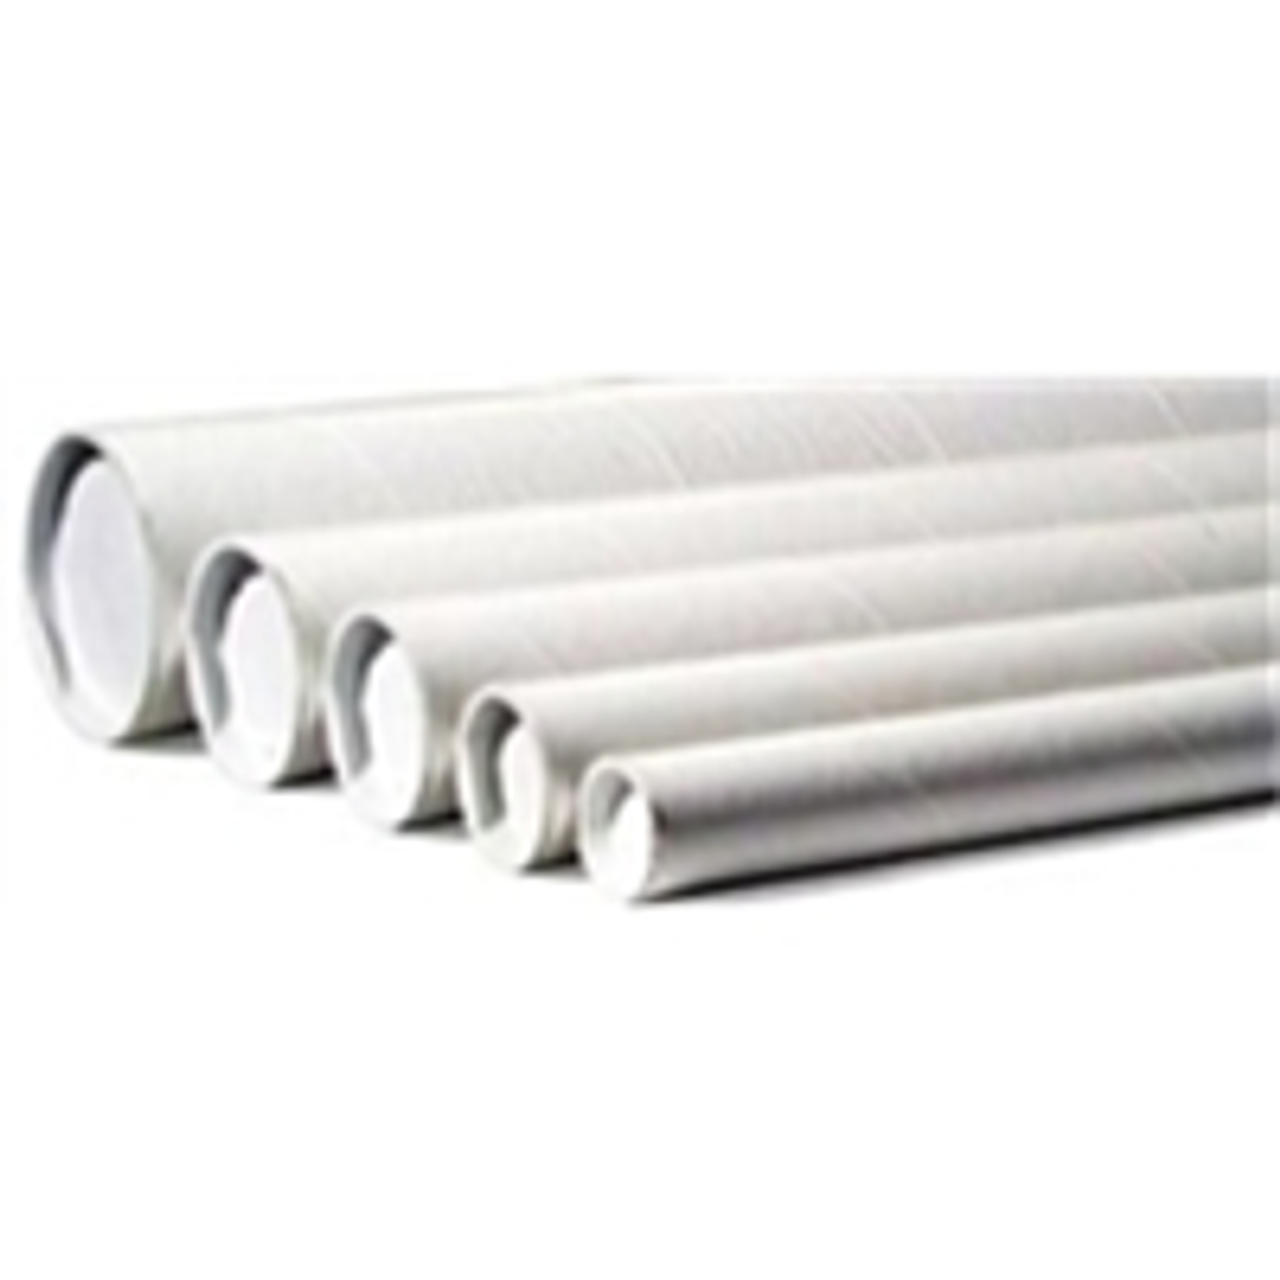 Bilot White Mailing Tubes with s, 2-inch x 36 inch usable length (6 Pack) 